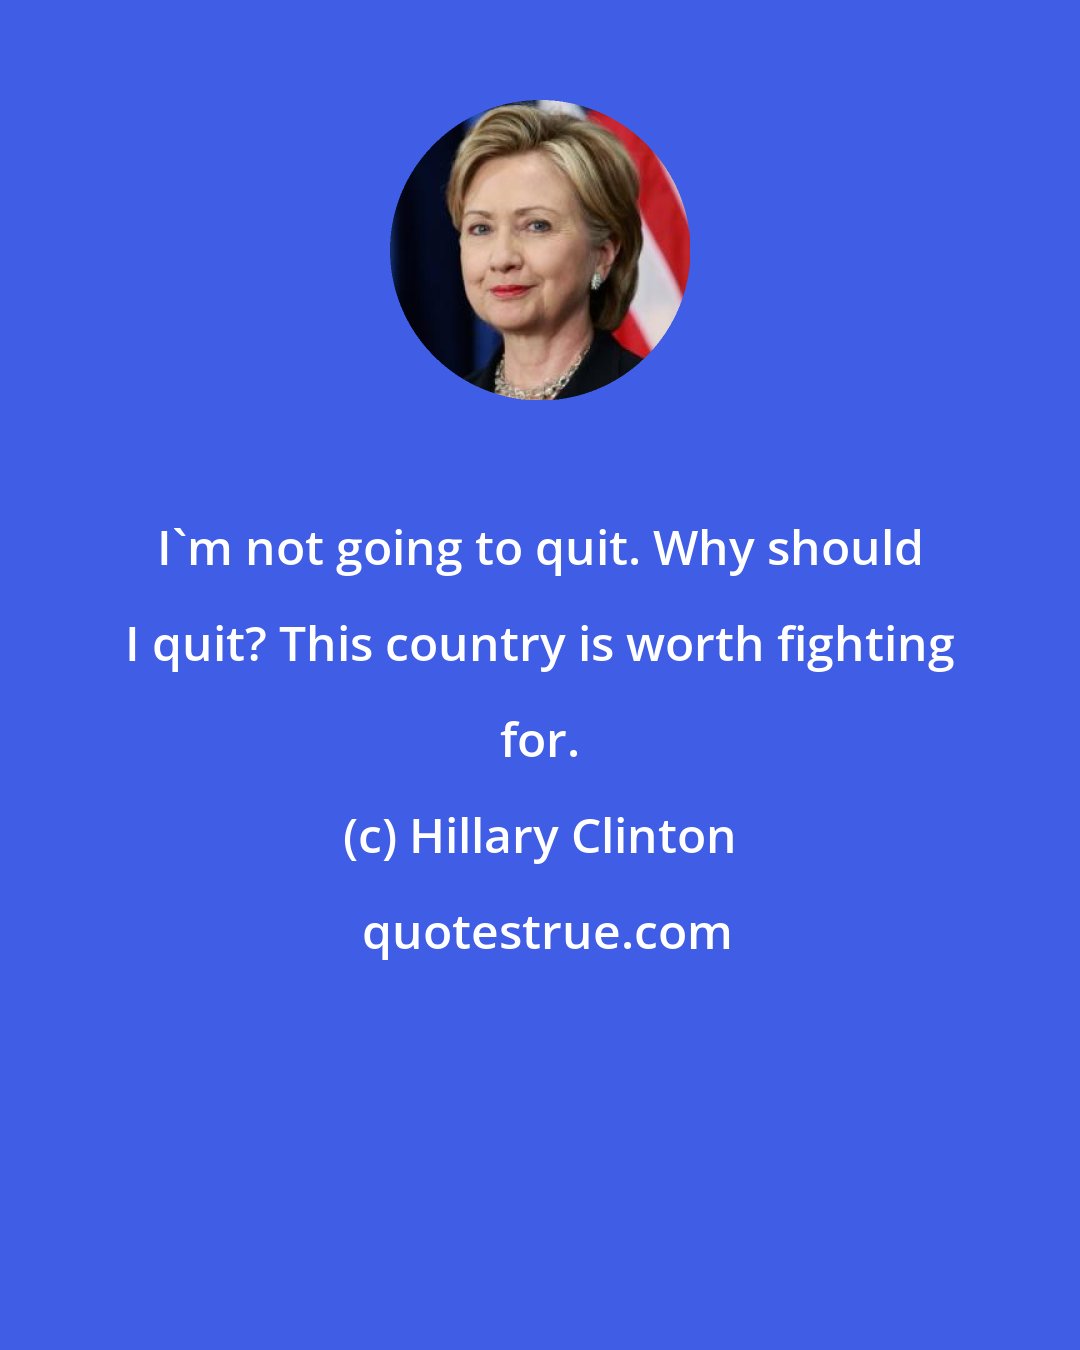 Hillary Clinton: I'm not going to quit. Why should I quit? This country is worth fighting for.